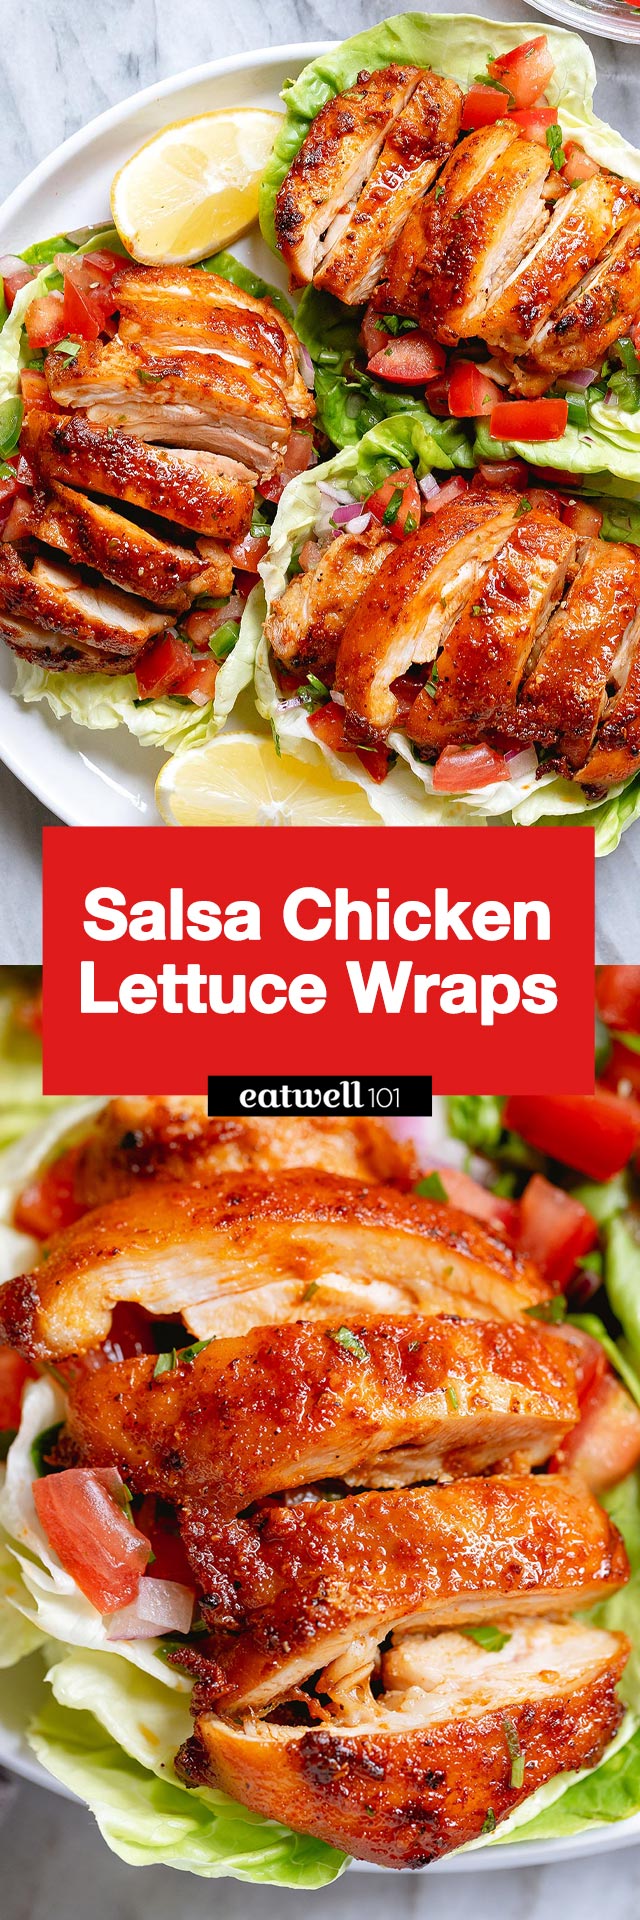 Salsa Chicken Lettuce Wraps - #chicken #lettucewraps #recipe #eatwell101 - These chicken lettuce wraps are so delicious - Perfect for a quick lunch, dinner, or meal prep!